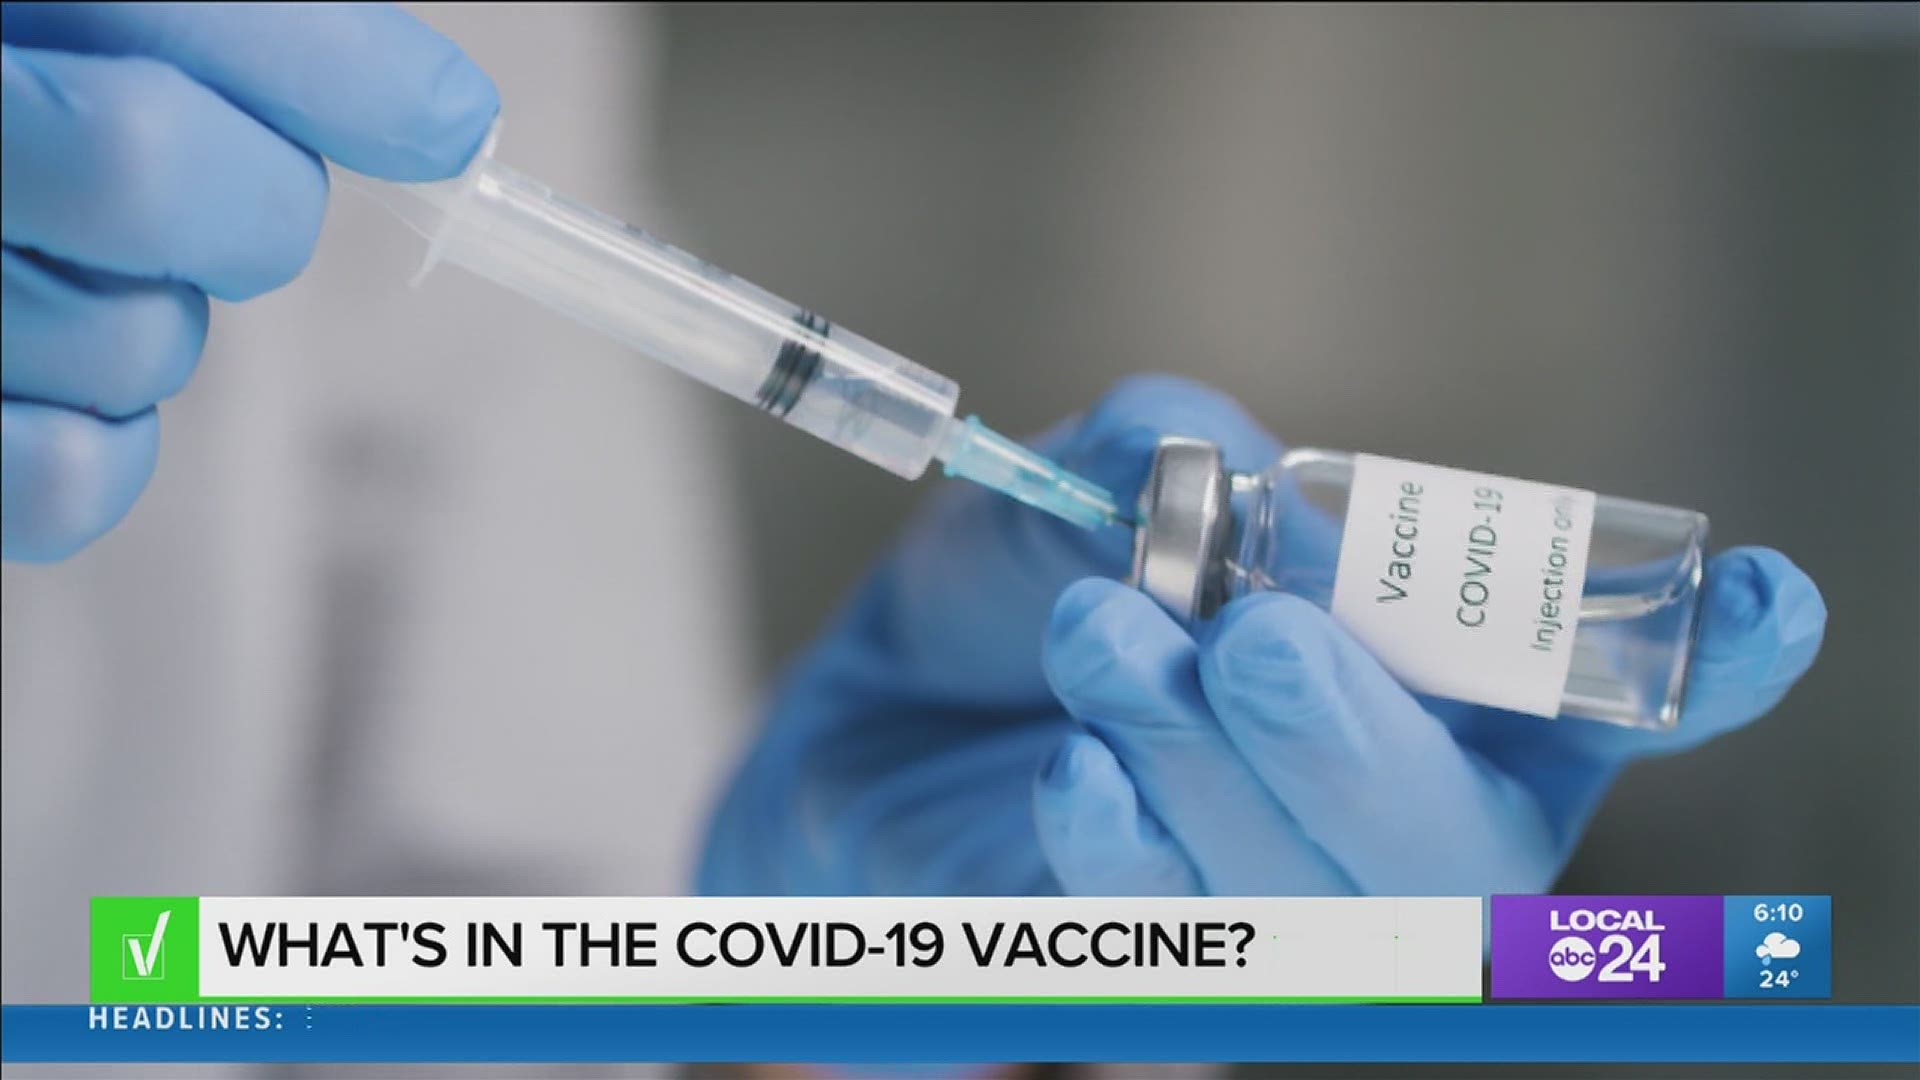 Many rumors have been flying around social media suggesting the vaccines contain the actual virus. Weeknight Anchor Katina Rankin verifies if it's fact or fiction.